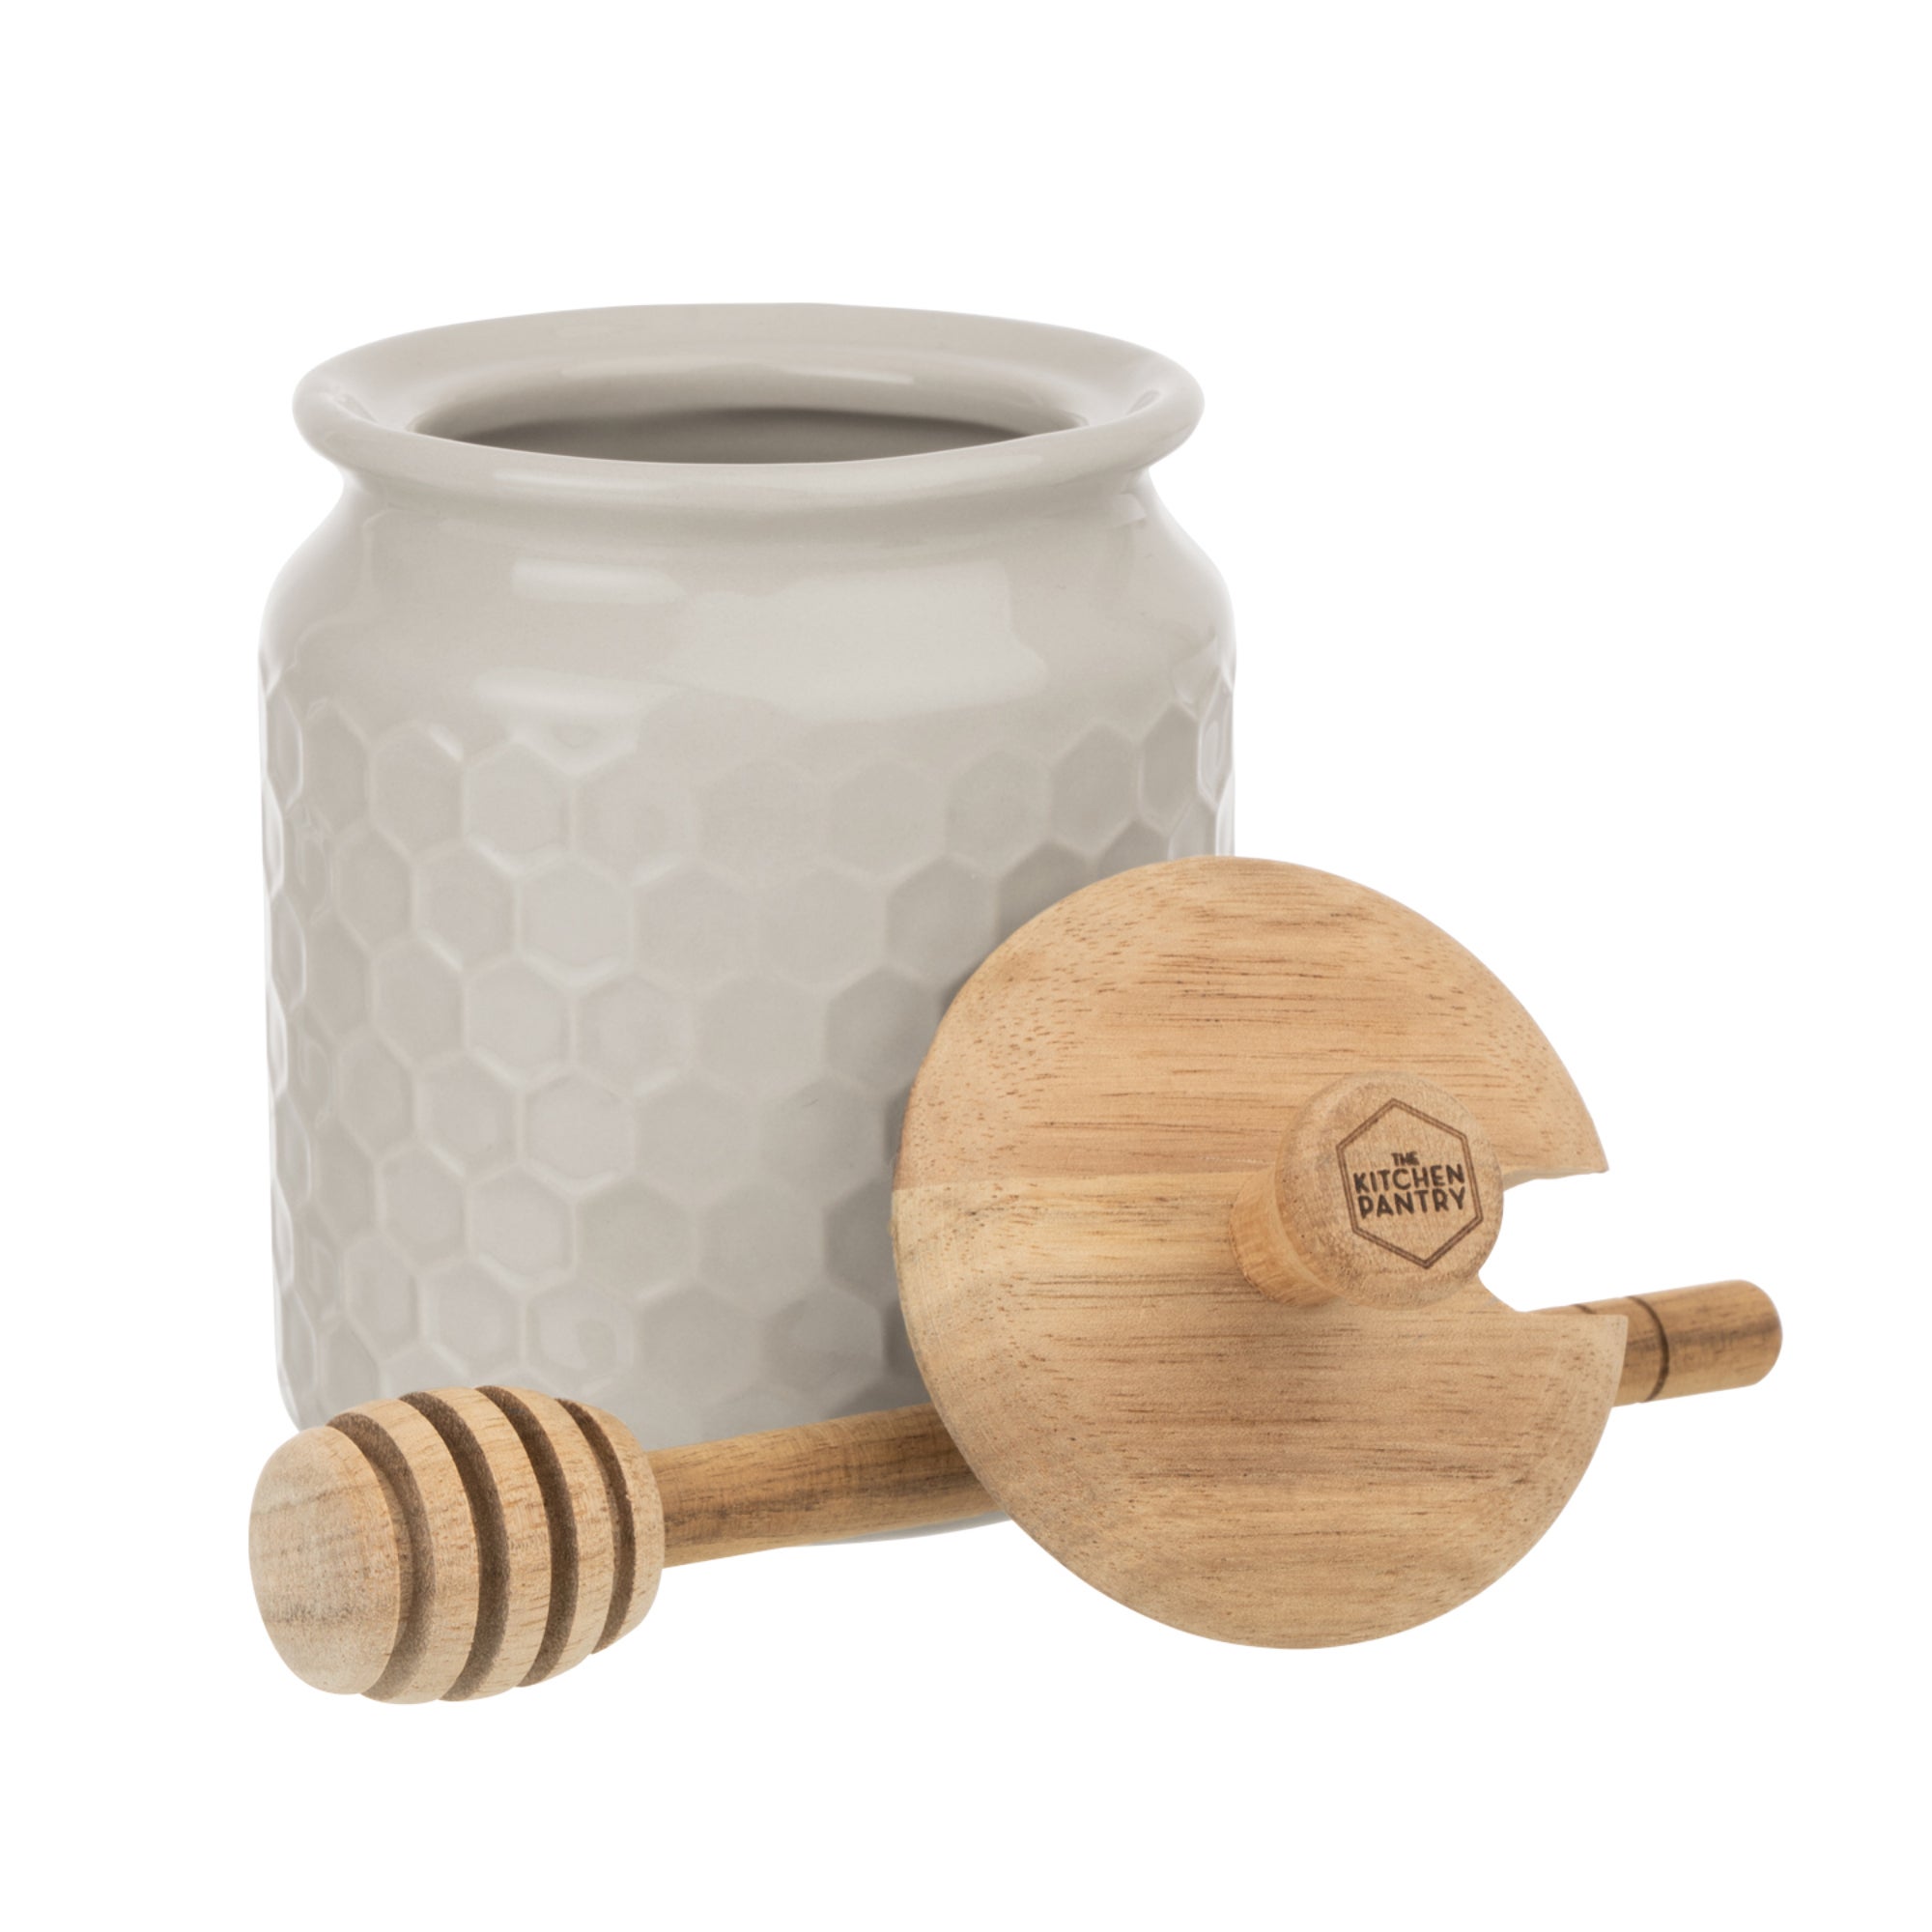 Kitchen Pantry Honey Pot With Drizzler